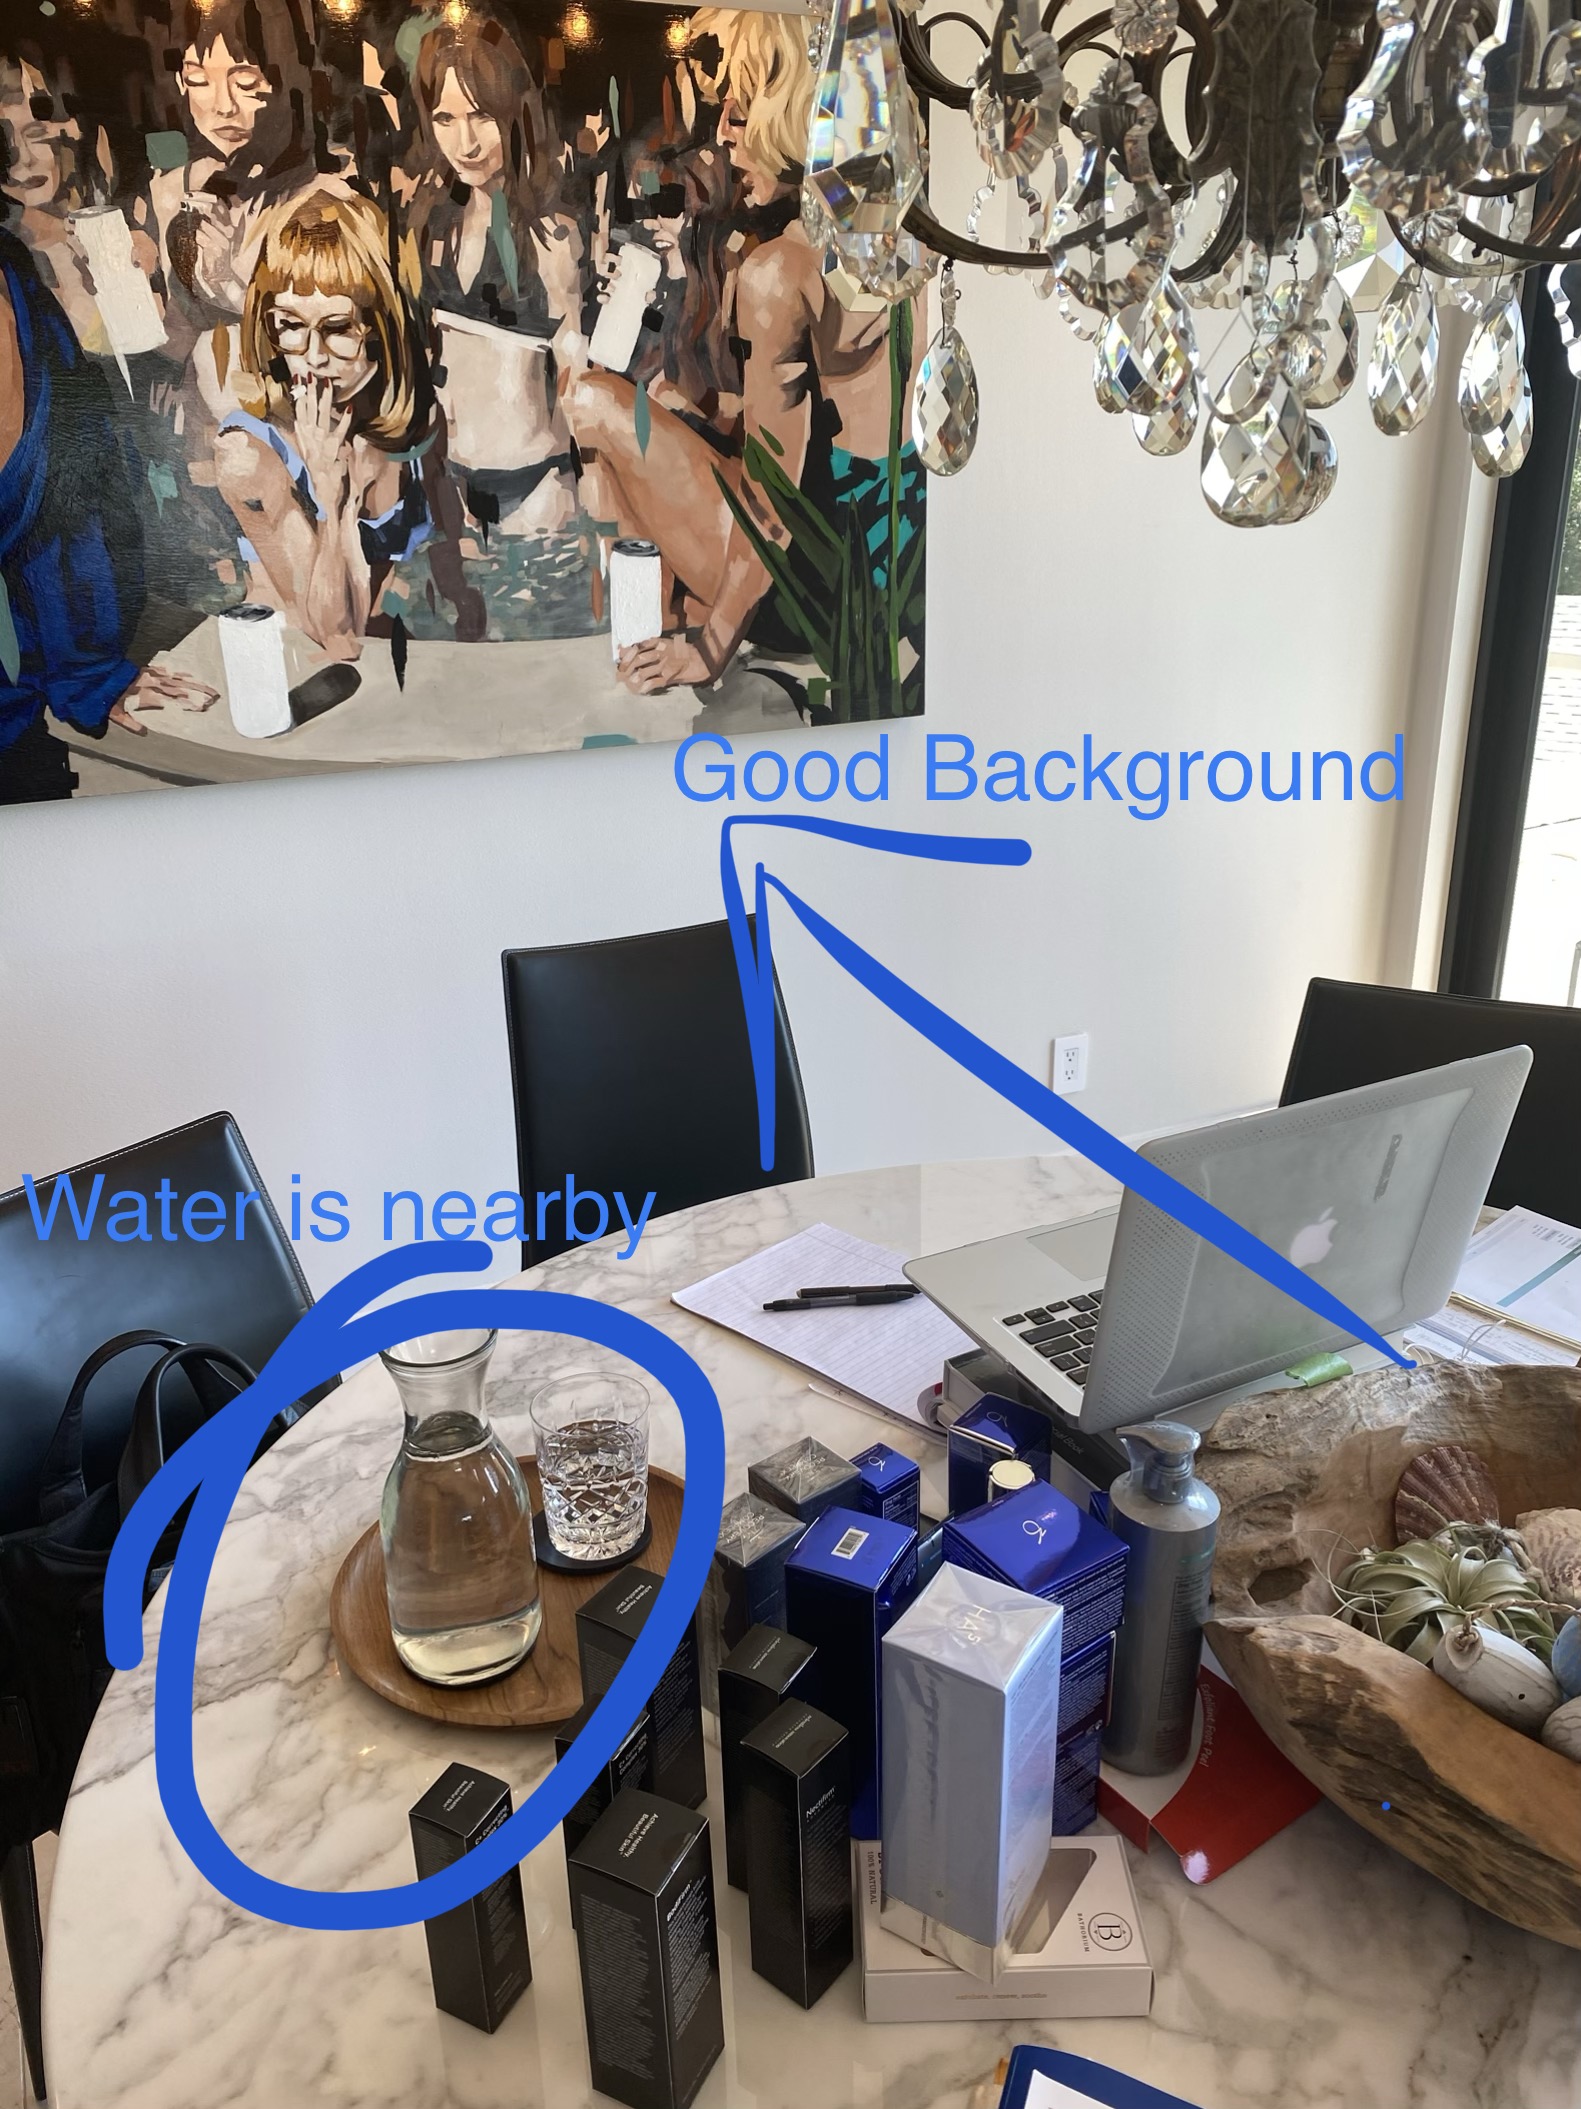 Demonstrating good background for virtual consult with water nearby